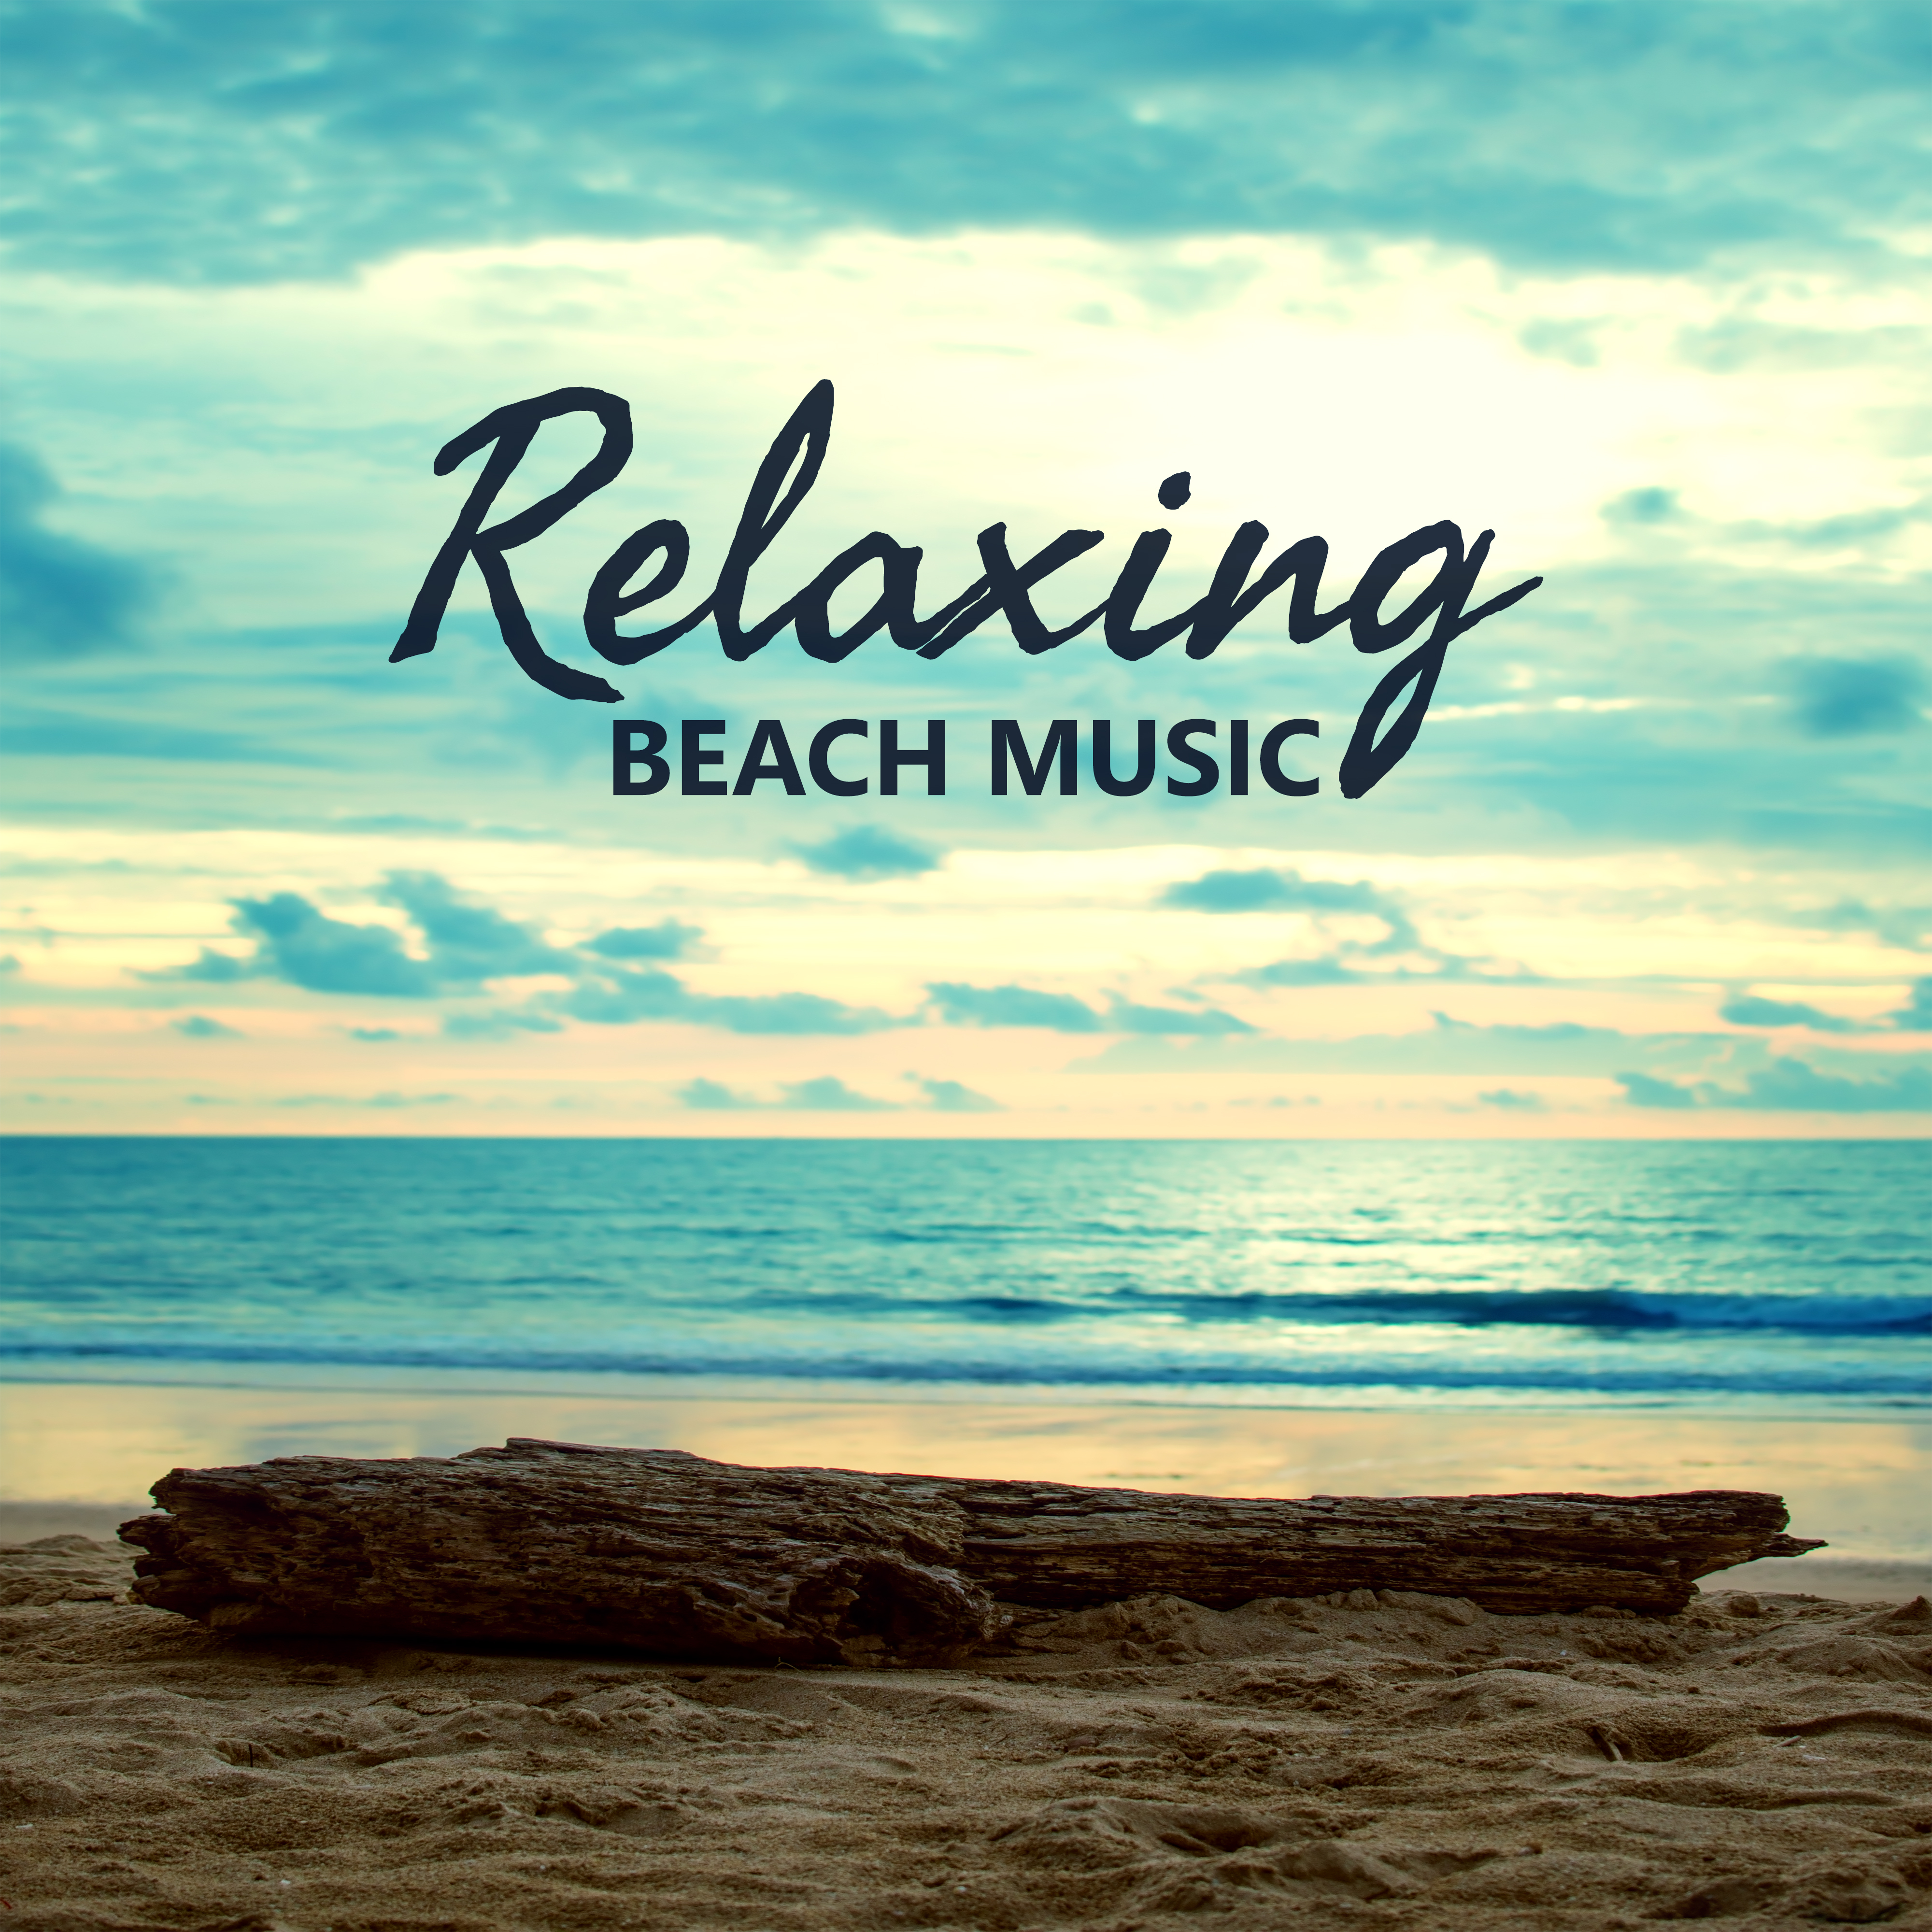 Relaxing Beach Music – Summer Chill Out Vibes, Relaxation in Sun, Holiday Time, Rest a Bit, Peaceful Waves